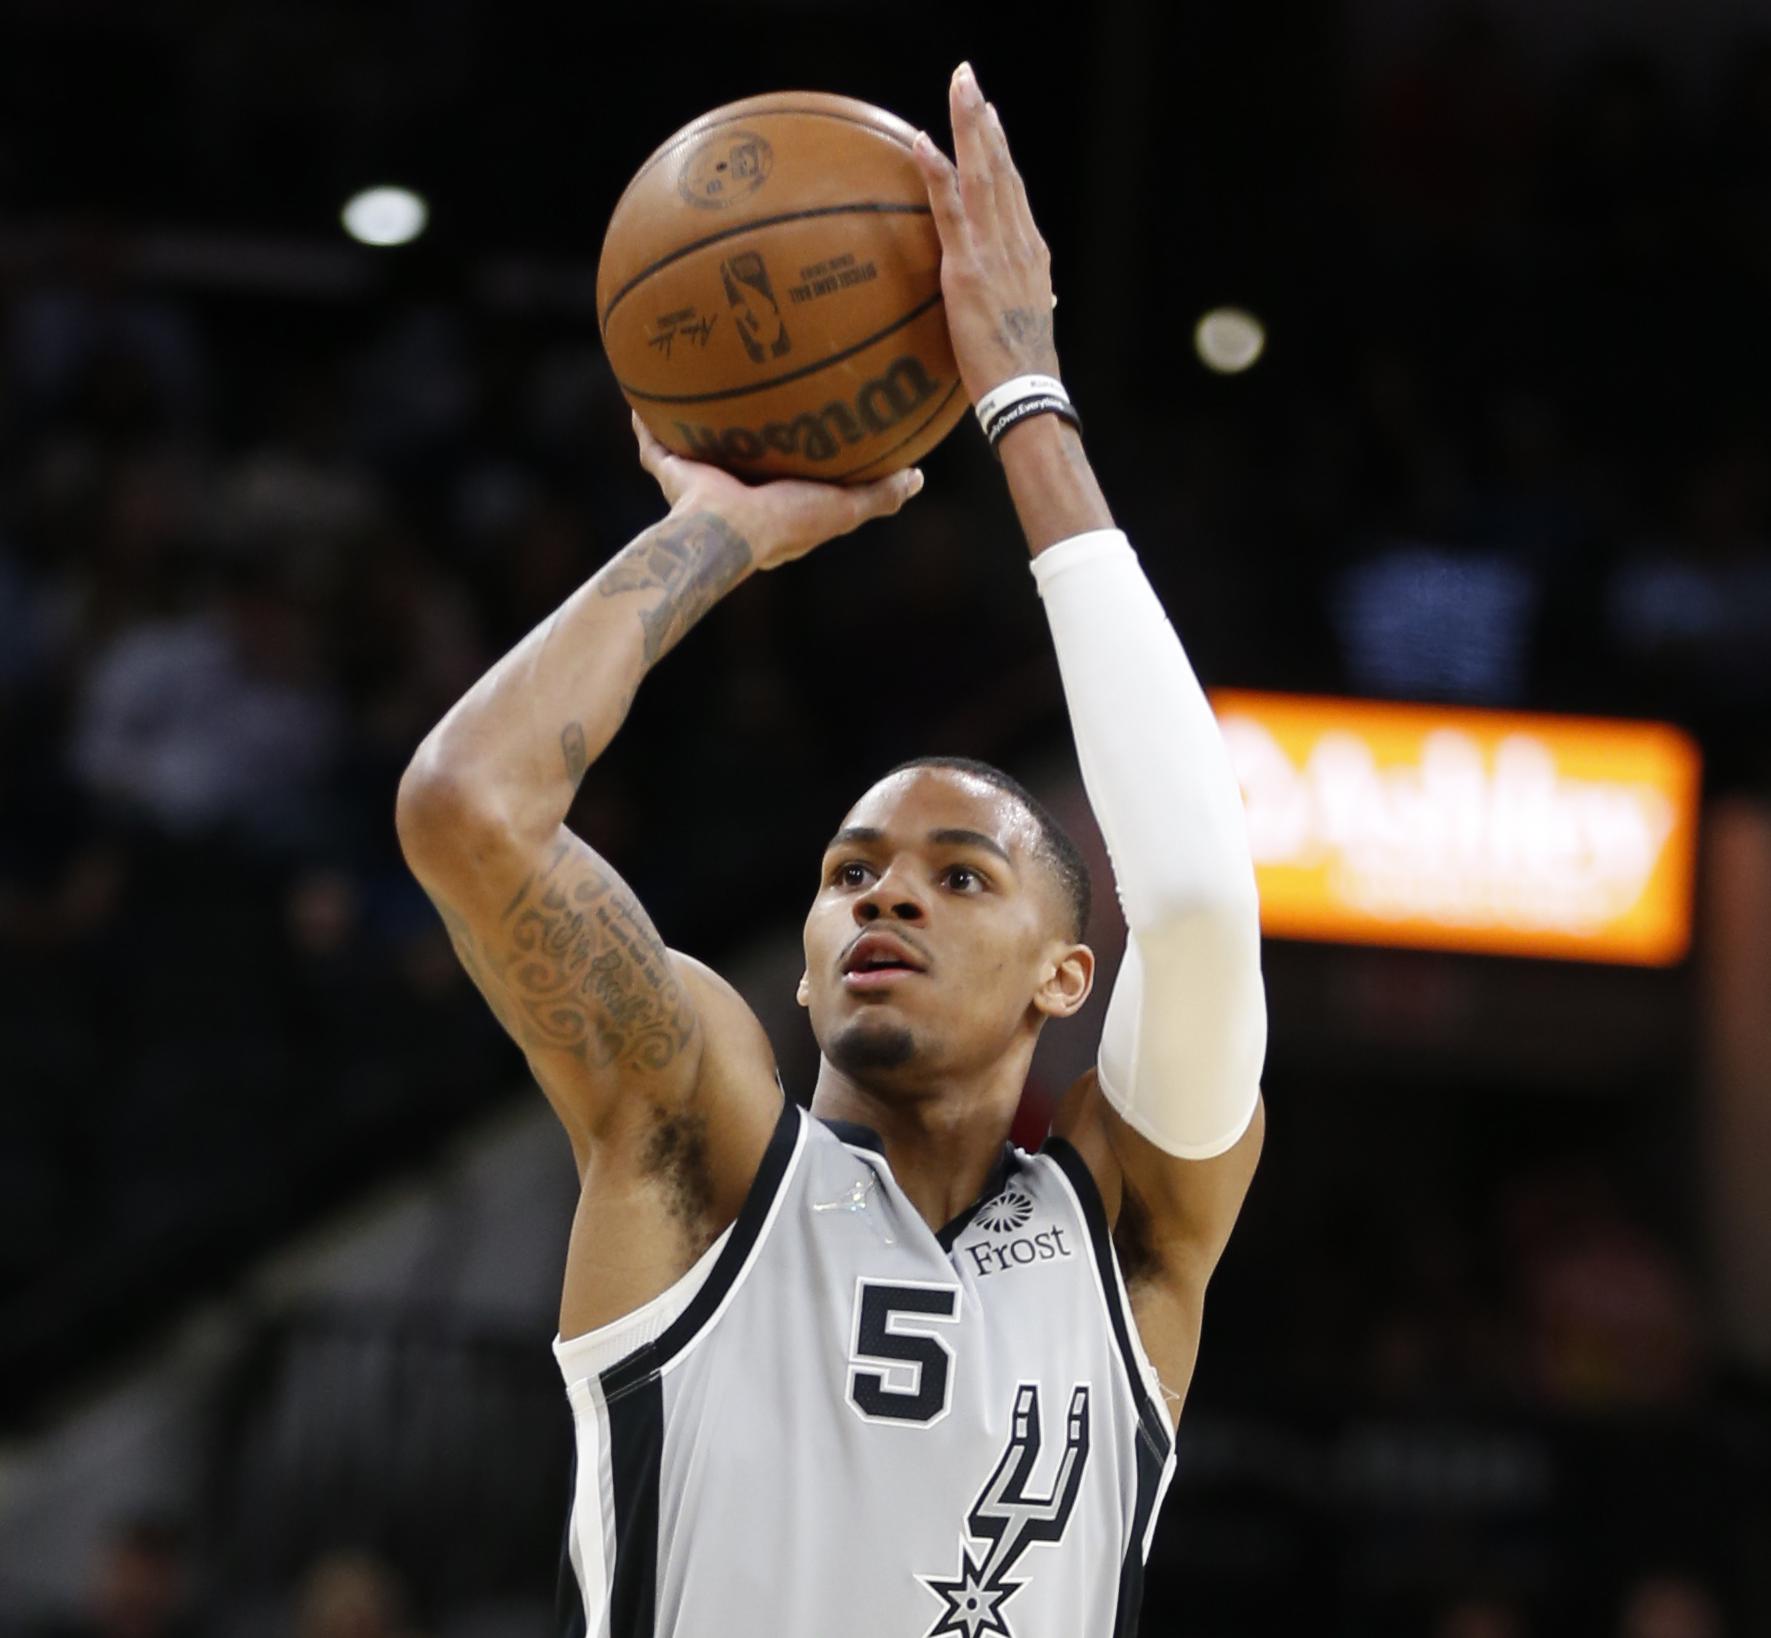 Fans debate if Spurs' Dejounte Murray will become an all-star in